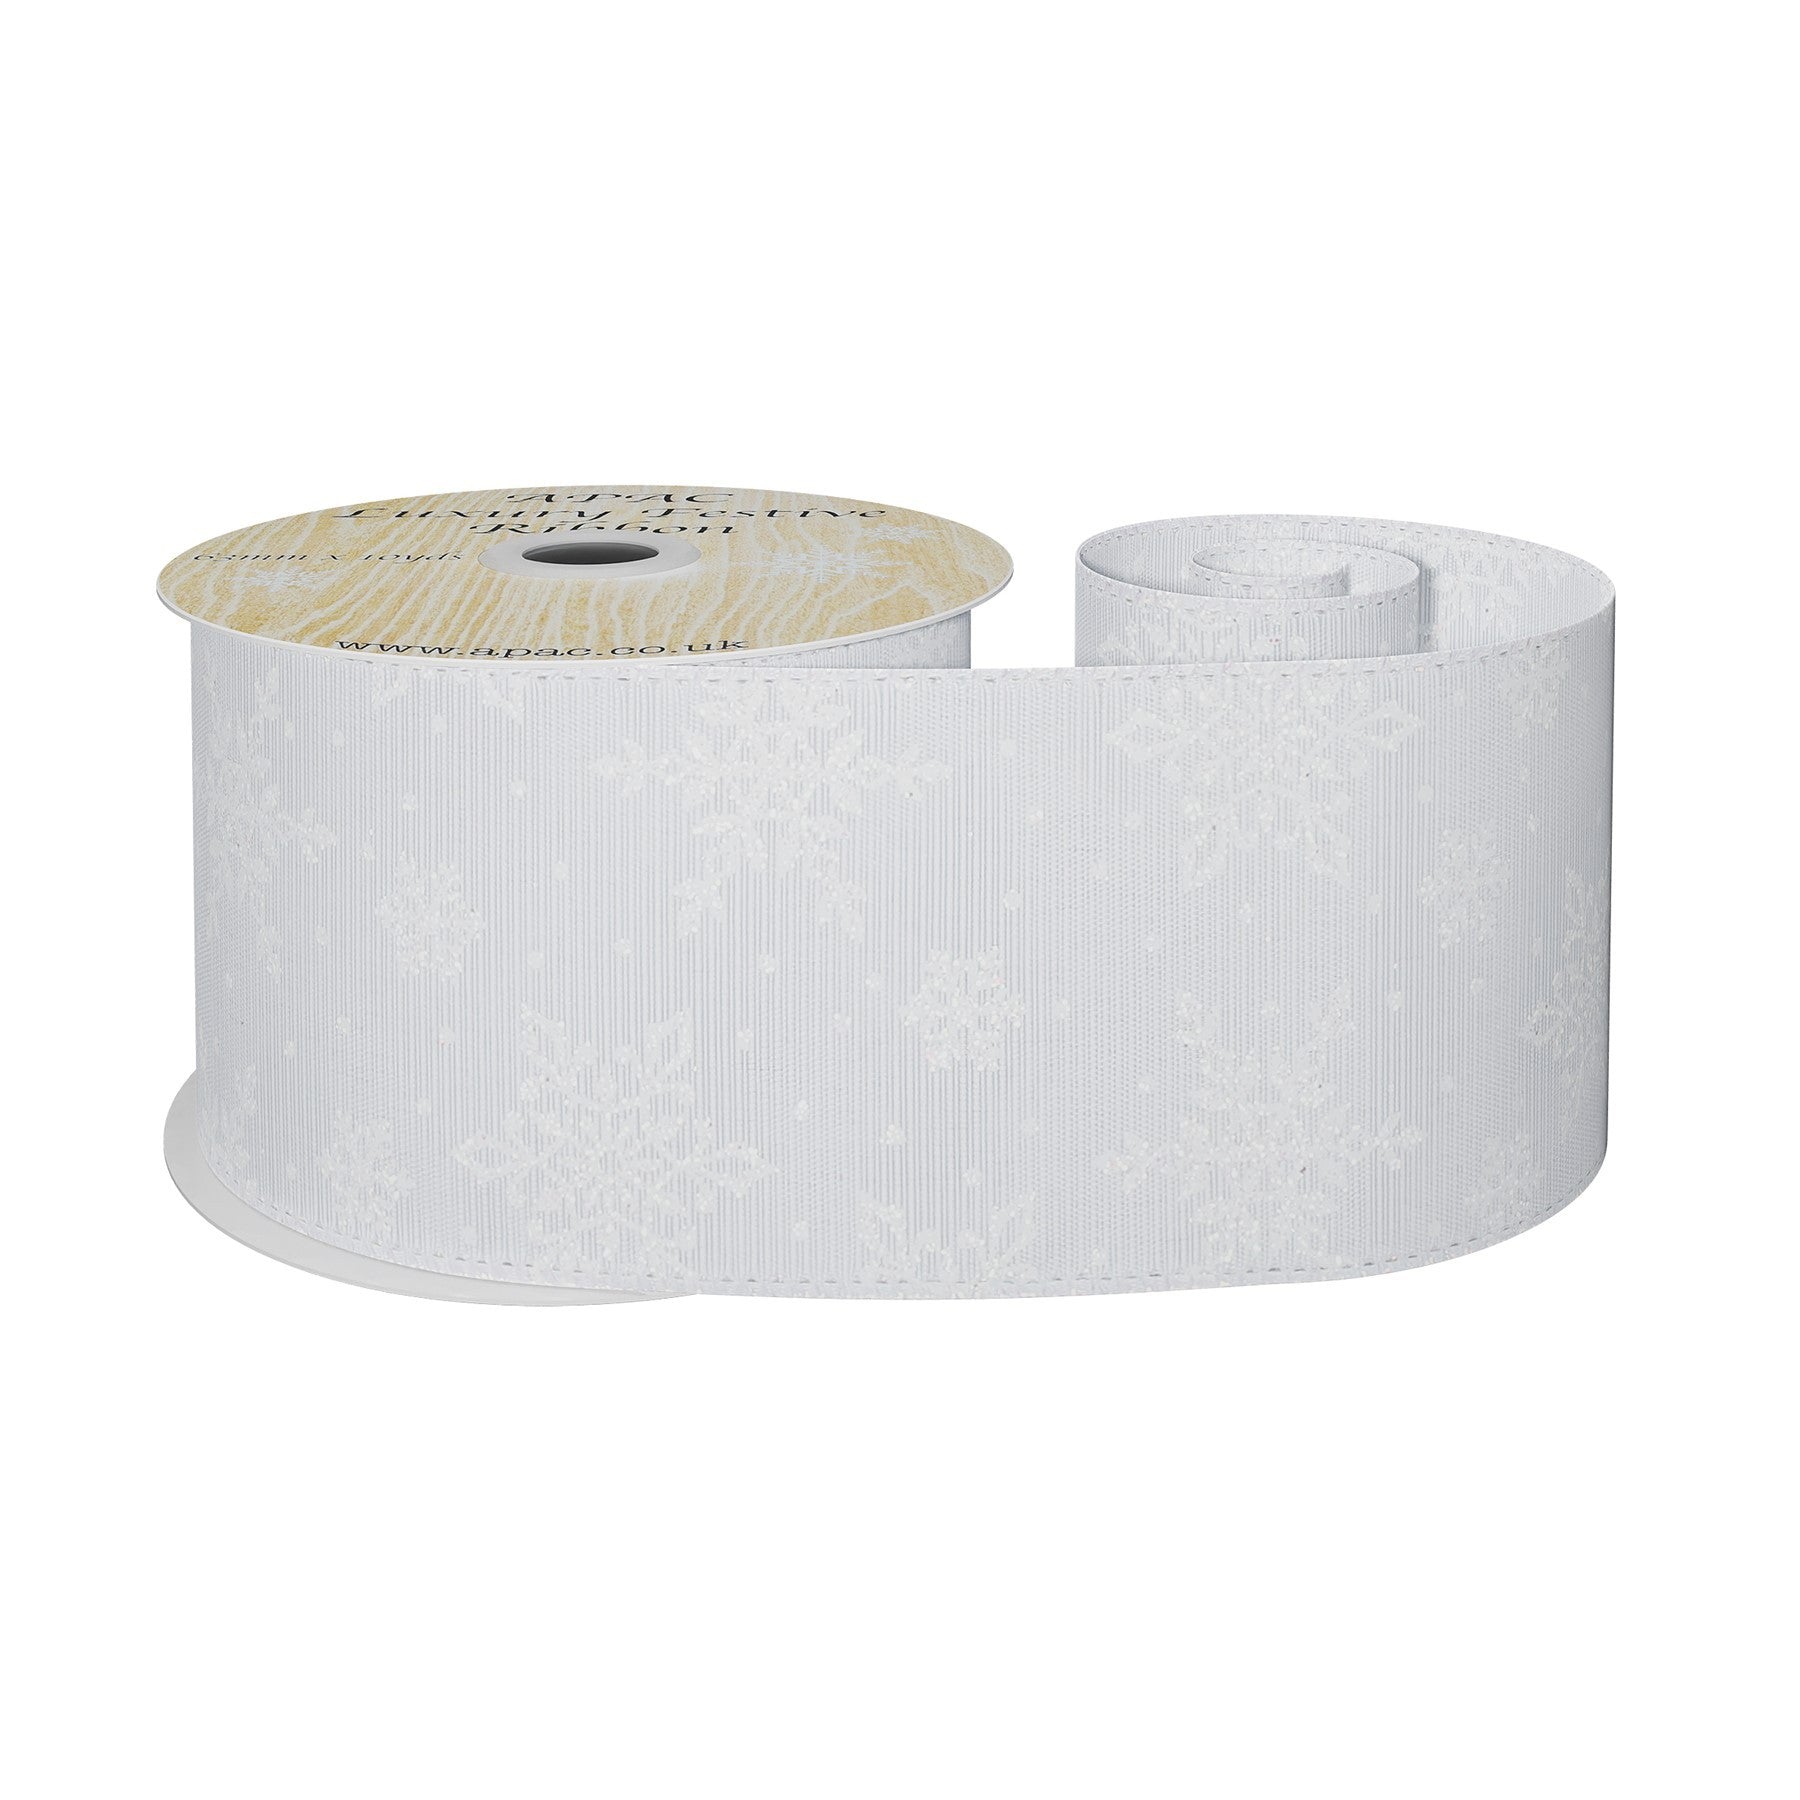 View White Wired Ribbon with Glitter Snowflakes 63mm x 10 yards information